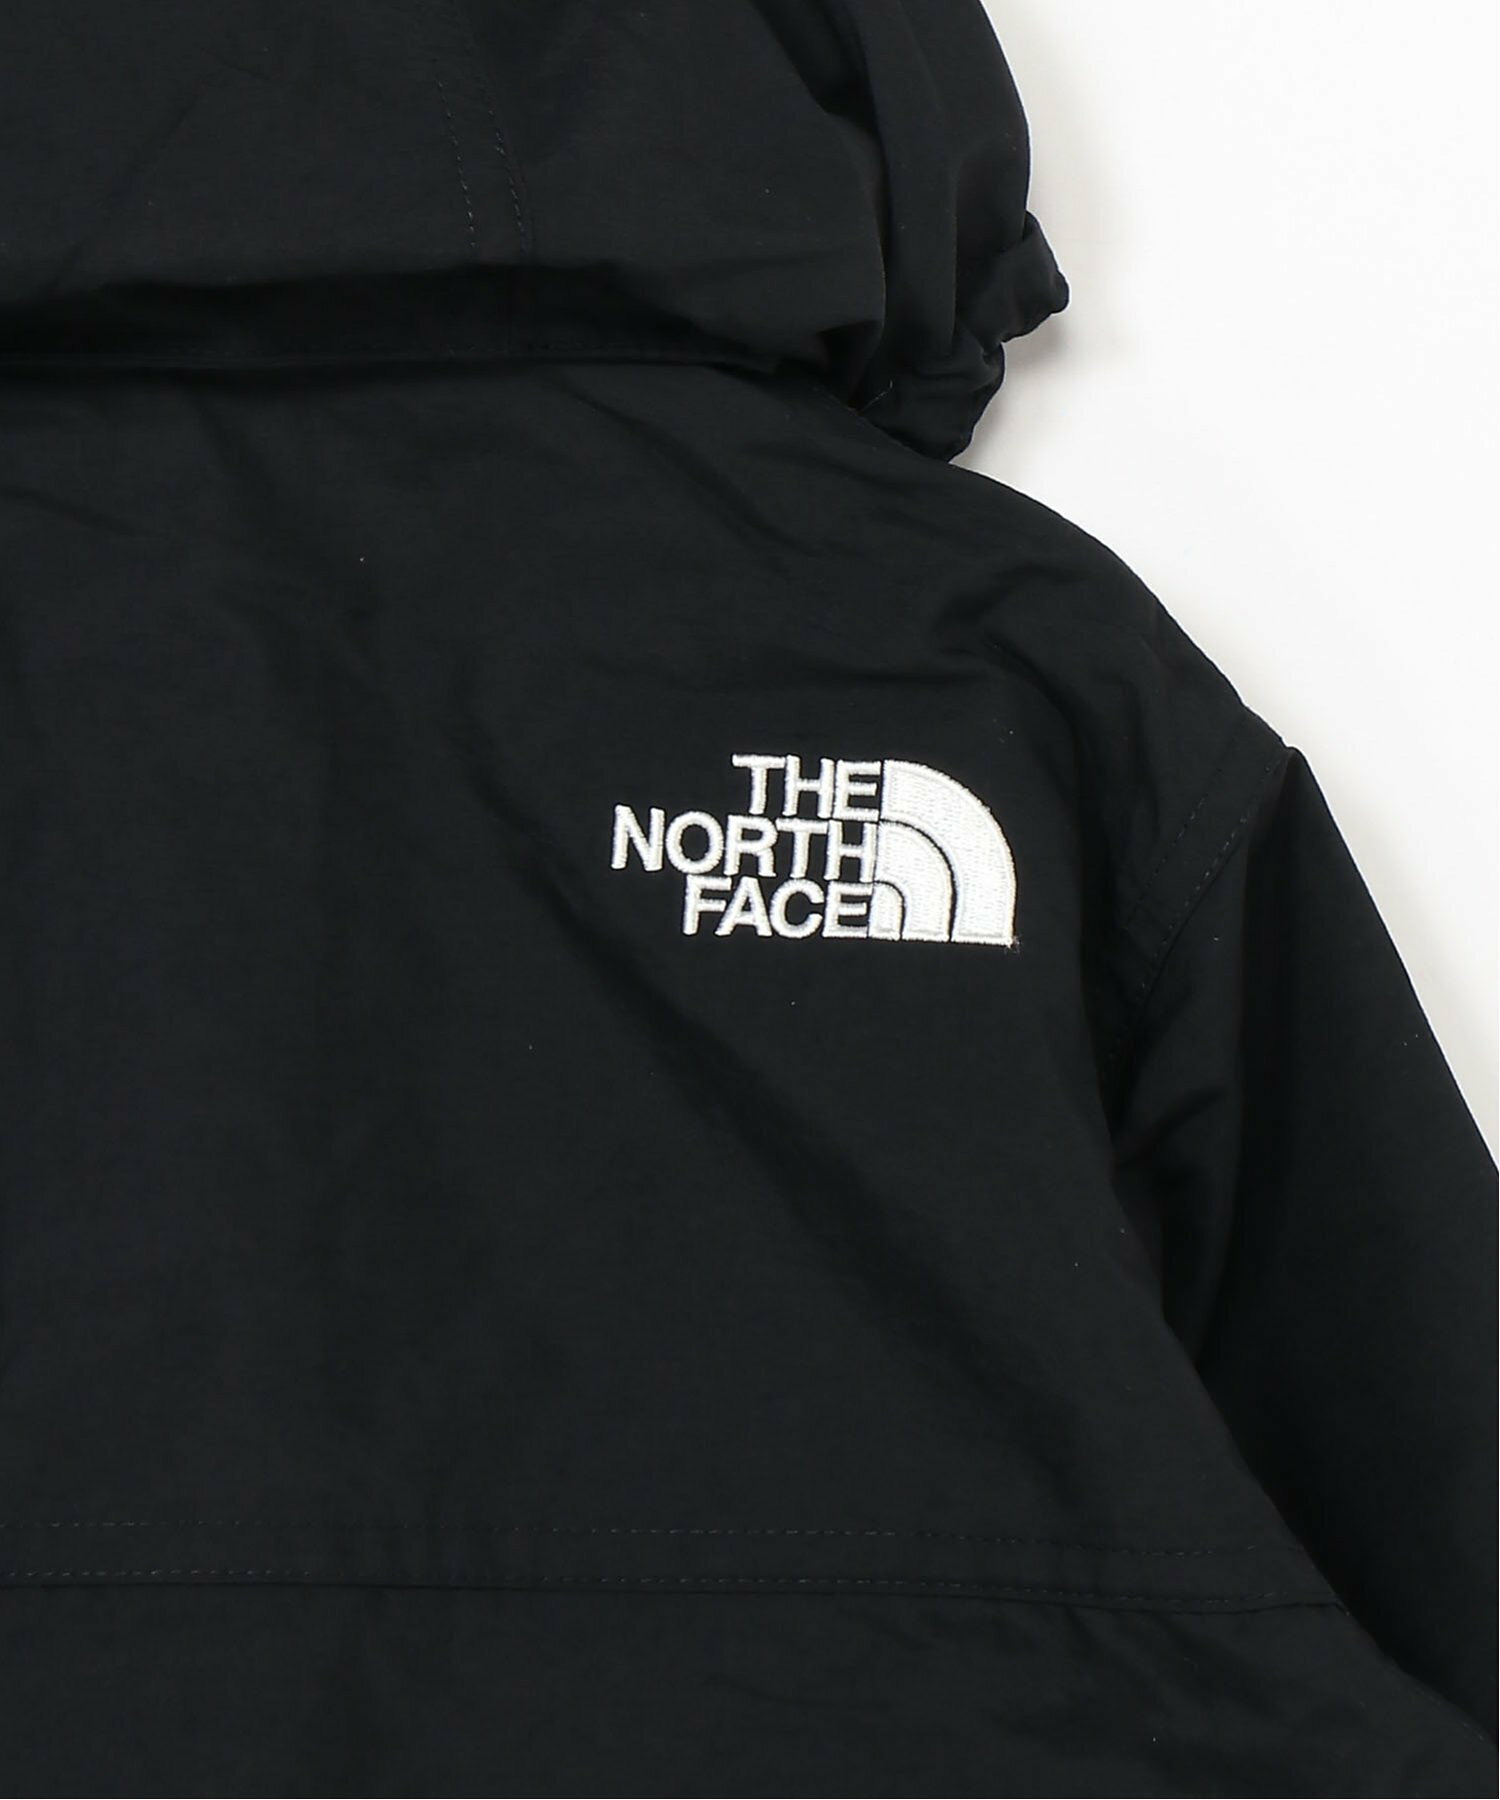 THE NORTH FACE/NPJ72310 キッズ コンパクトジャケット